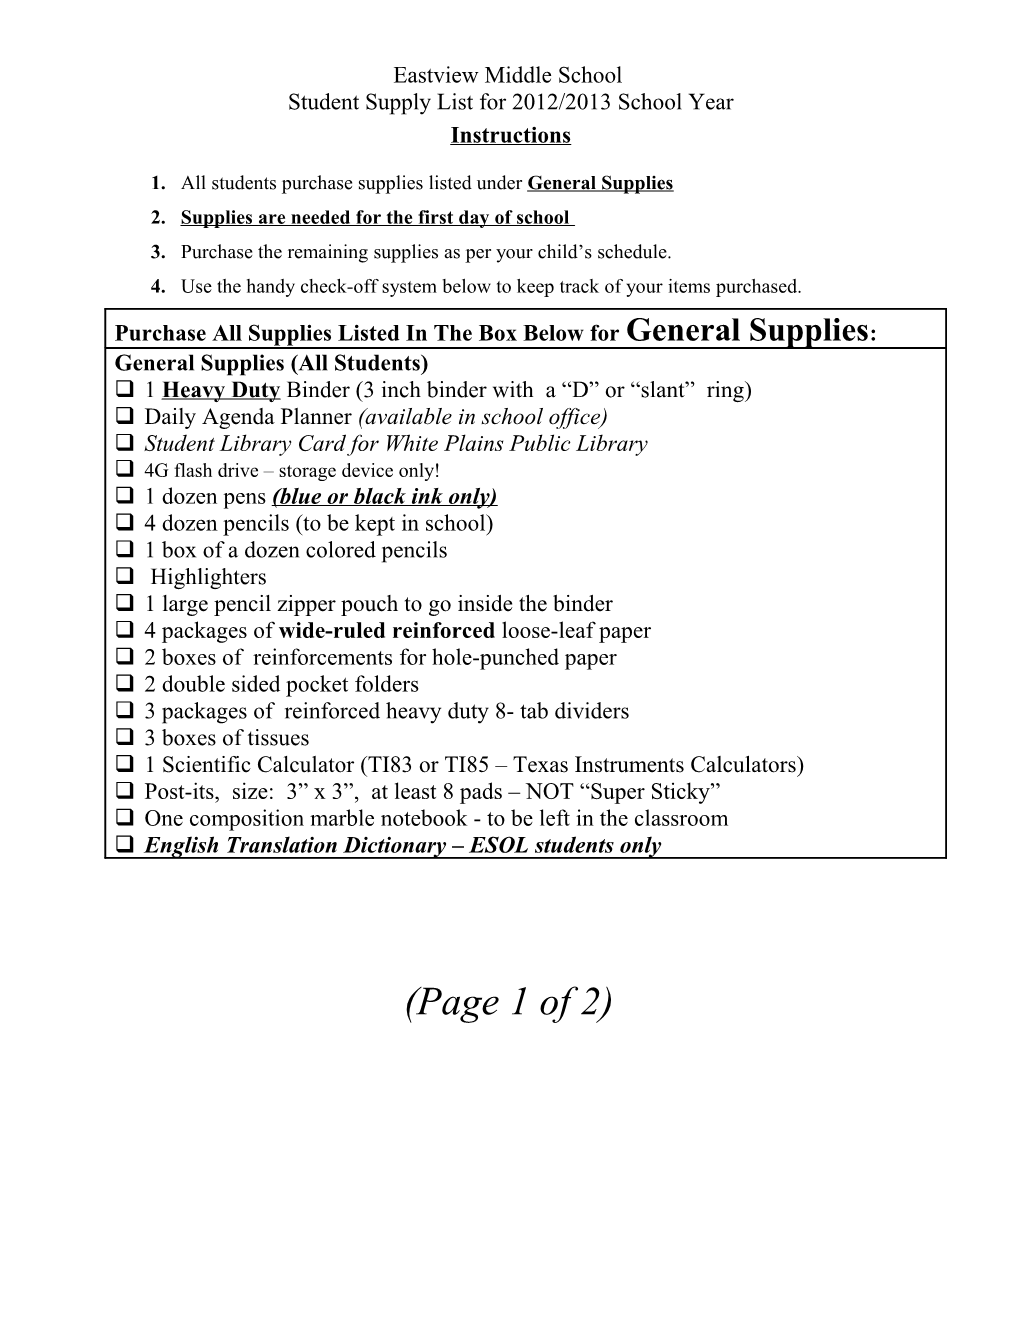 Student Supply List for 2012/2013 School Year